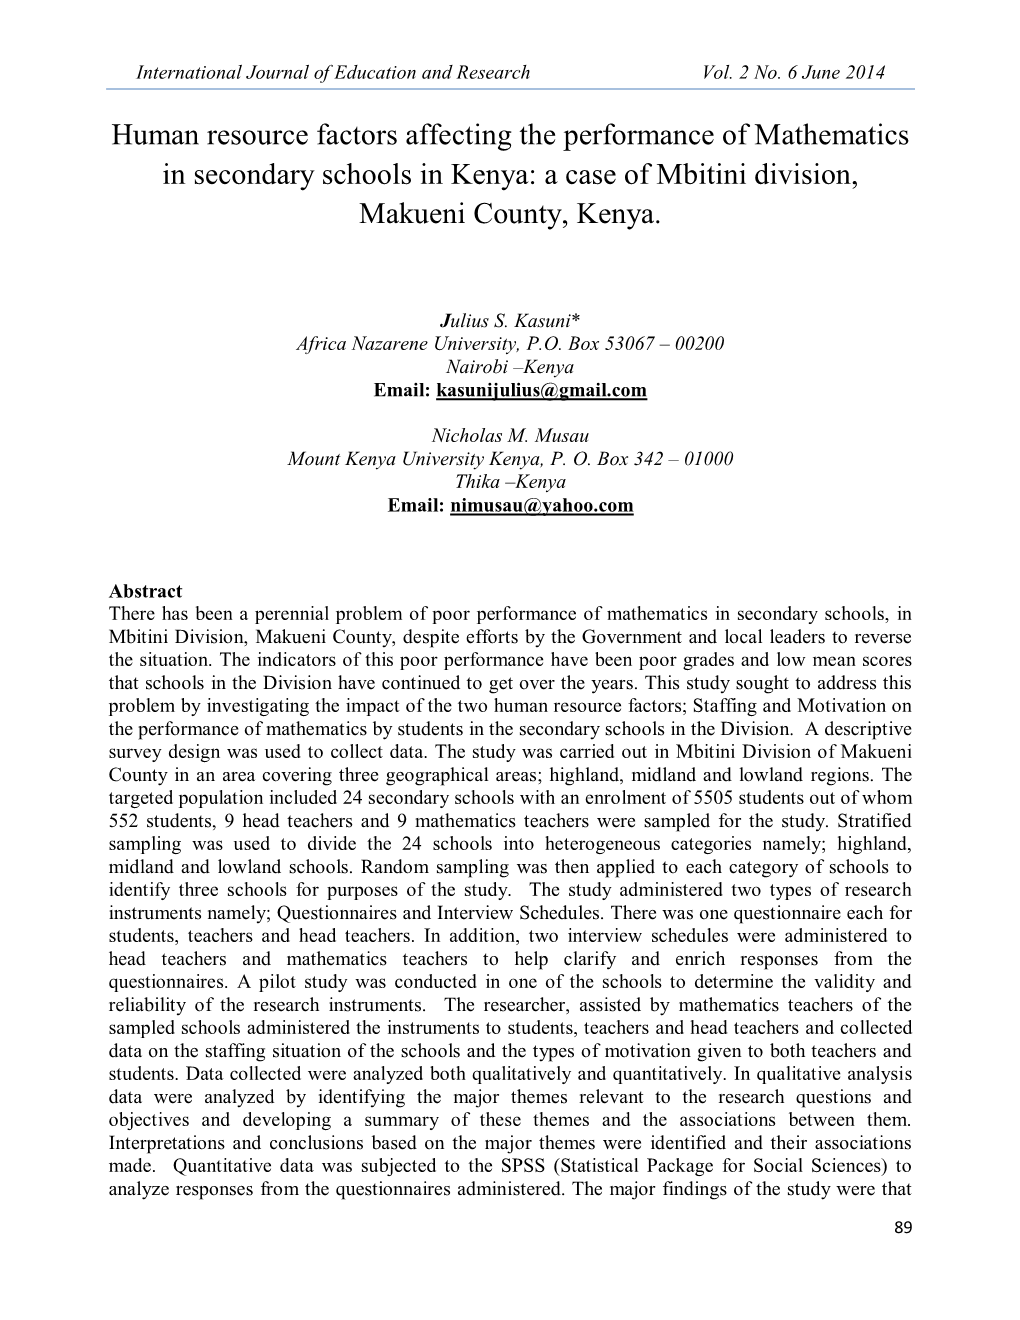 Human Resource Factors Affecting the Performance of Mathematics in Secondary Schools in Kenya: a Case of Mbitini Division, Makueni County, Kenya